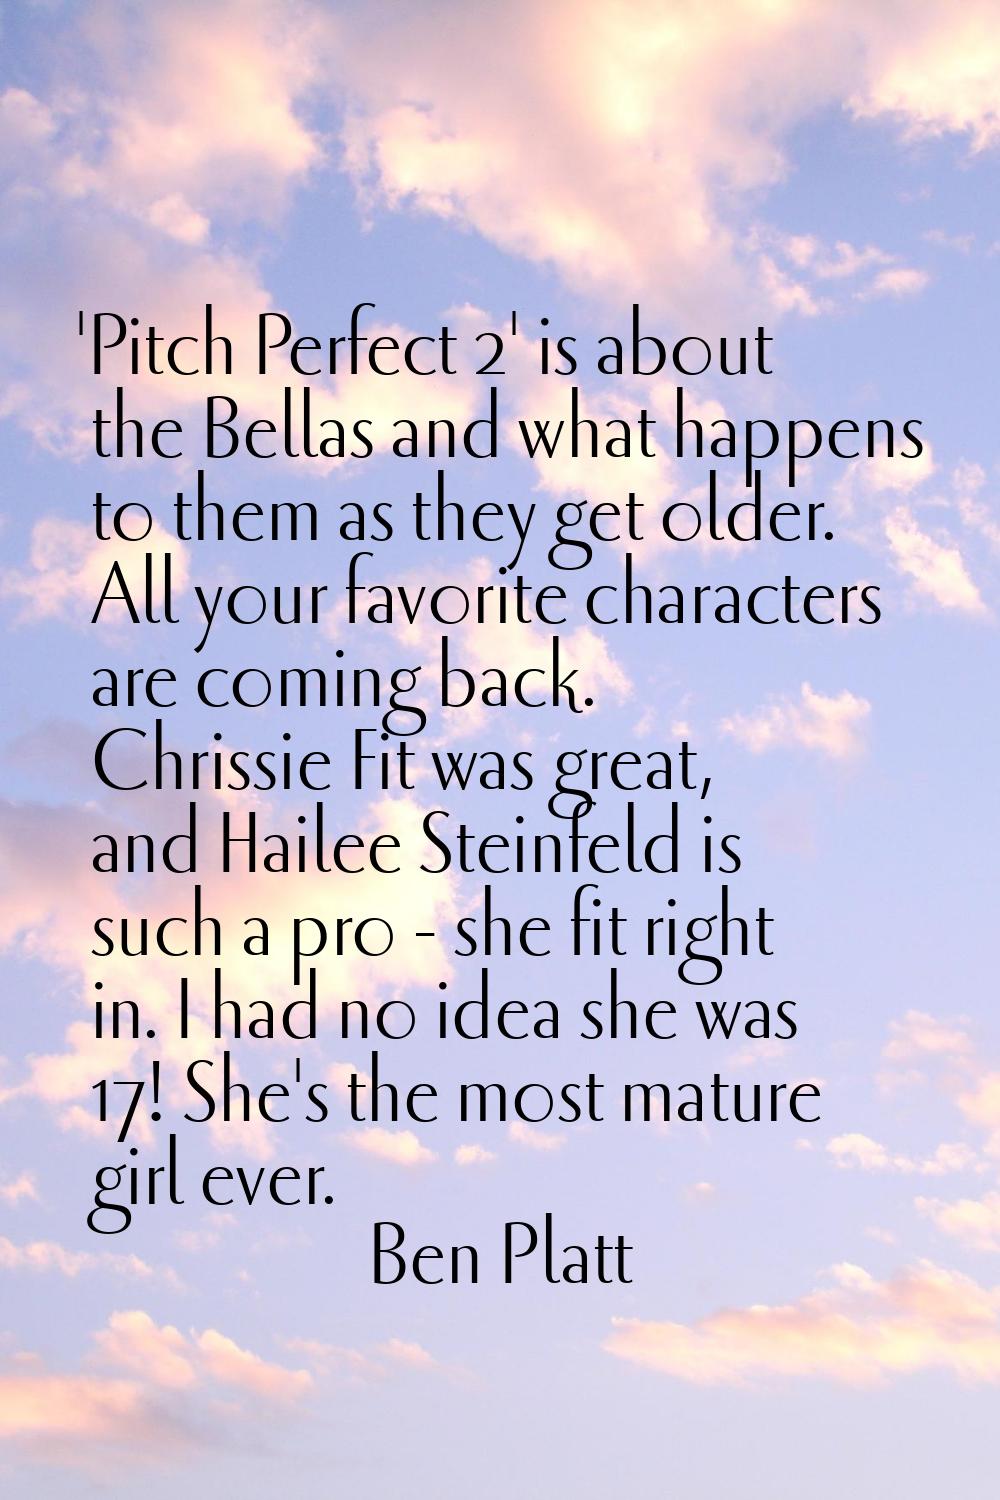 'Pitch Perfect 2' is about the Bellas and what happens to them as they get older. All your favorite